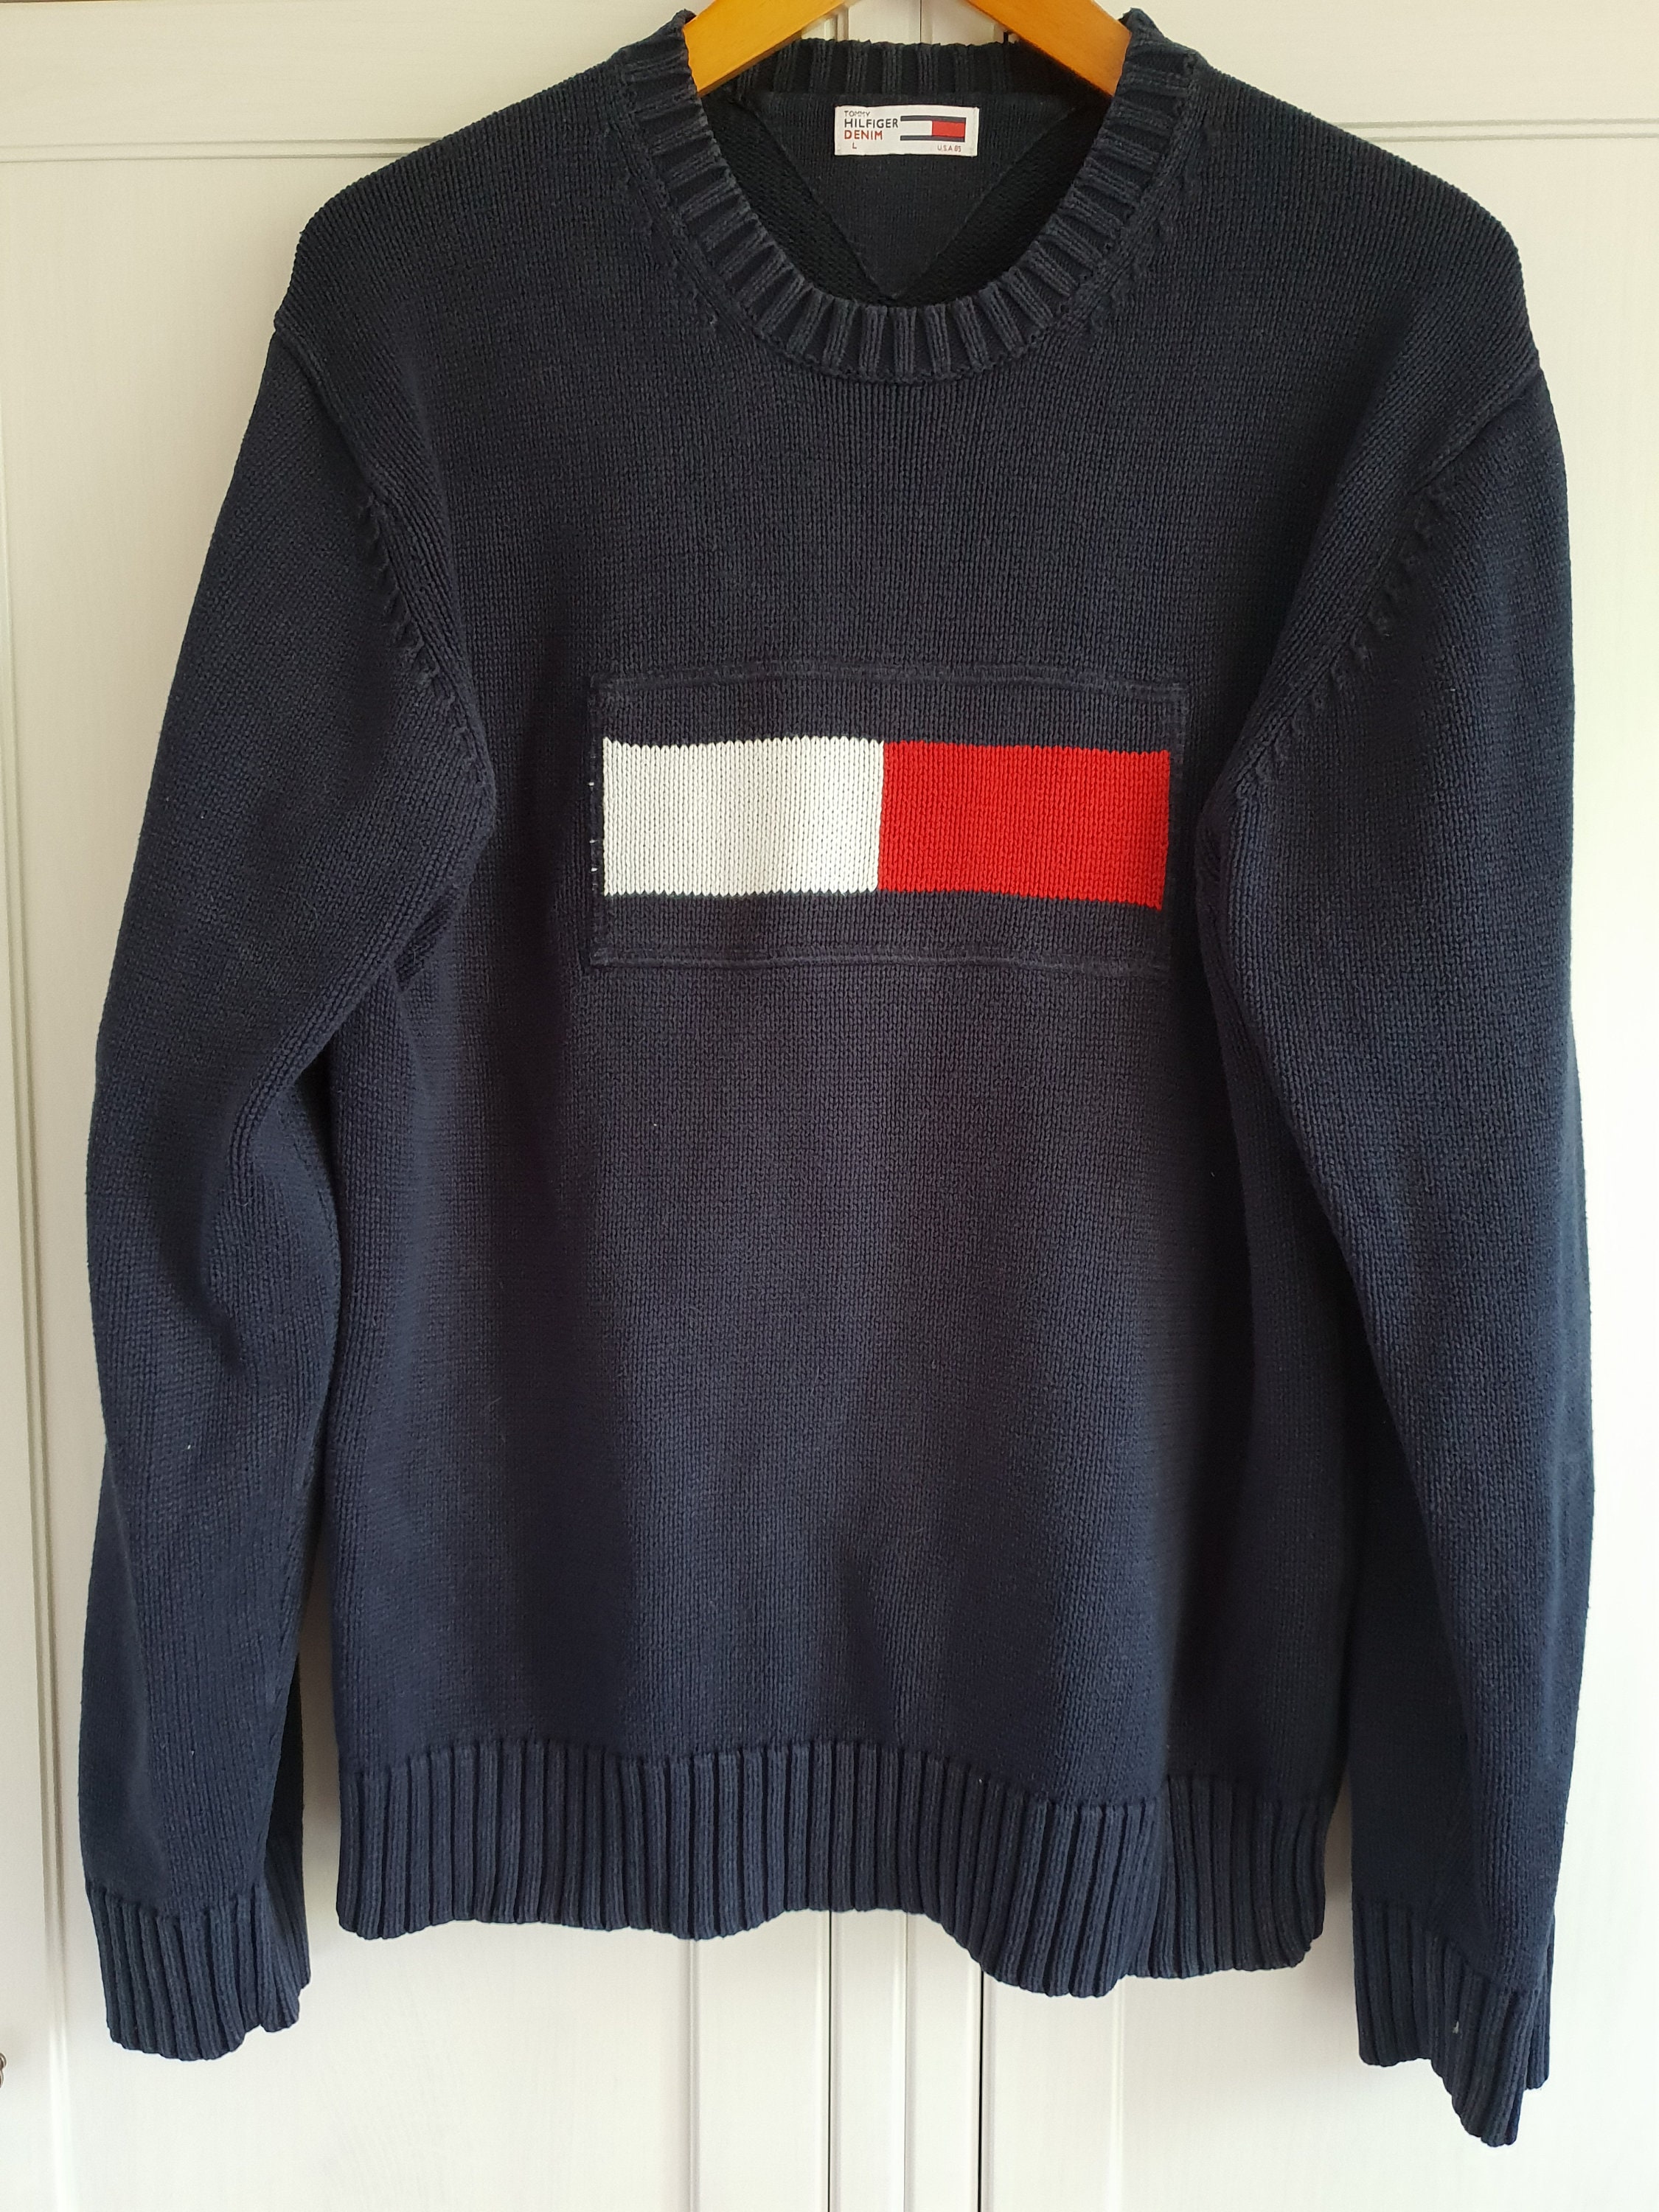 Buy Vintage Tommy Hilfiger Sweater Navy Blue Red White Oldschool in India Etsy